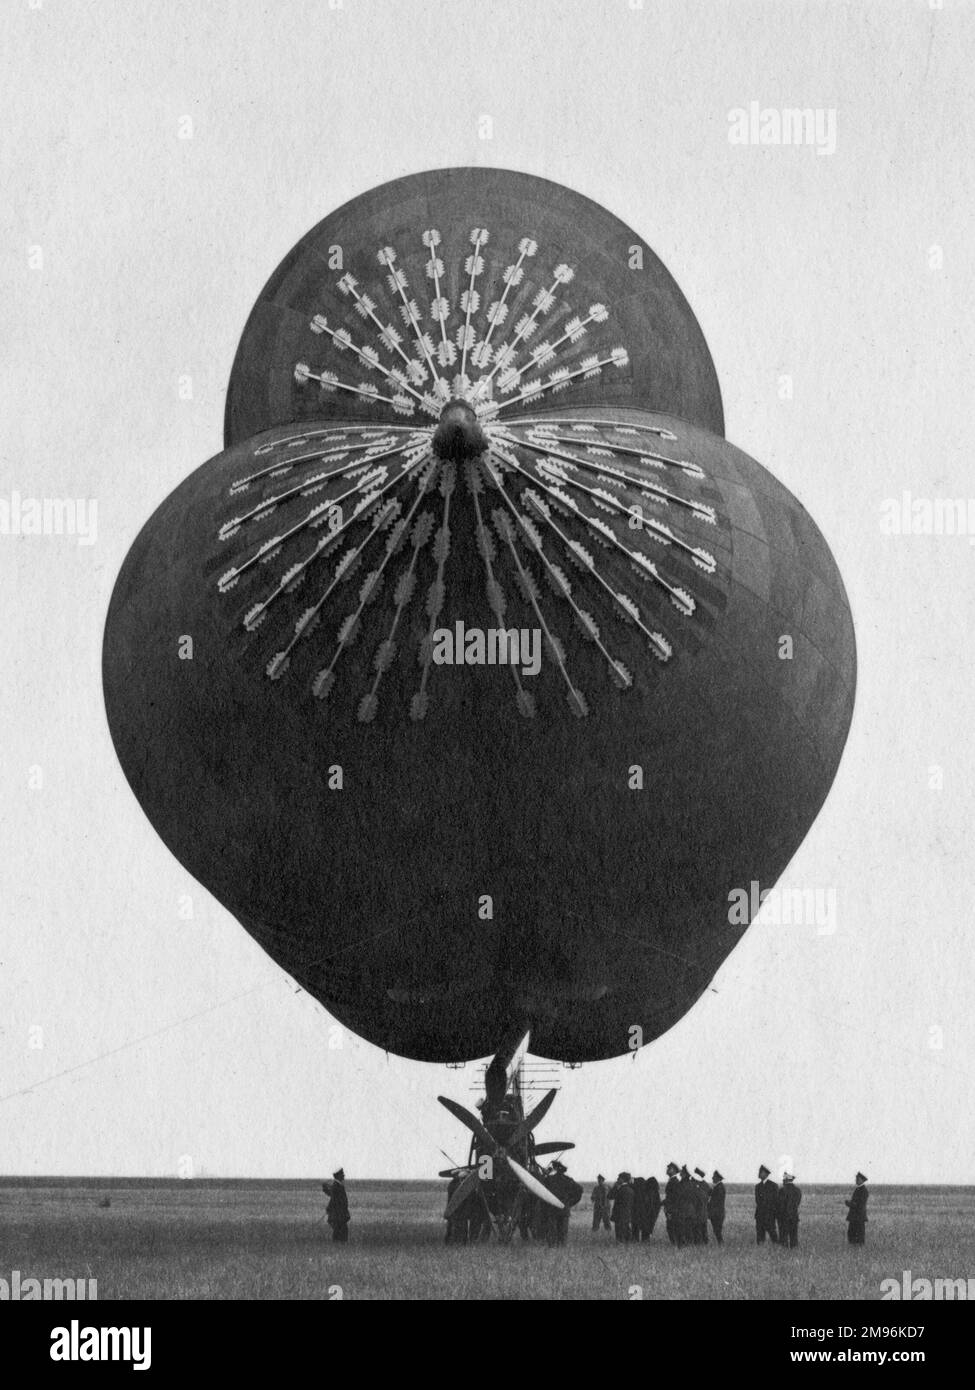 Early British dirigible, seen from the front, on the ground with crew. Stock Photo